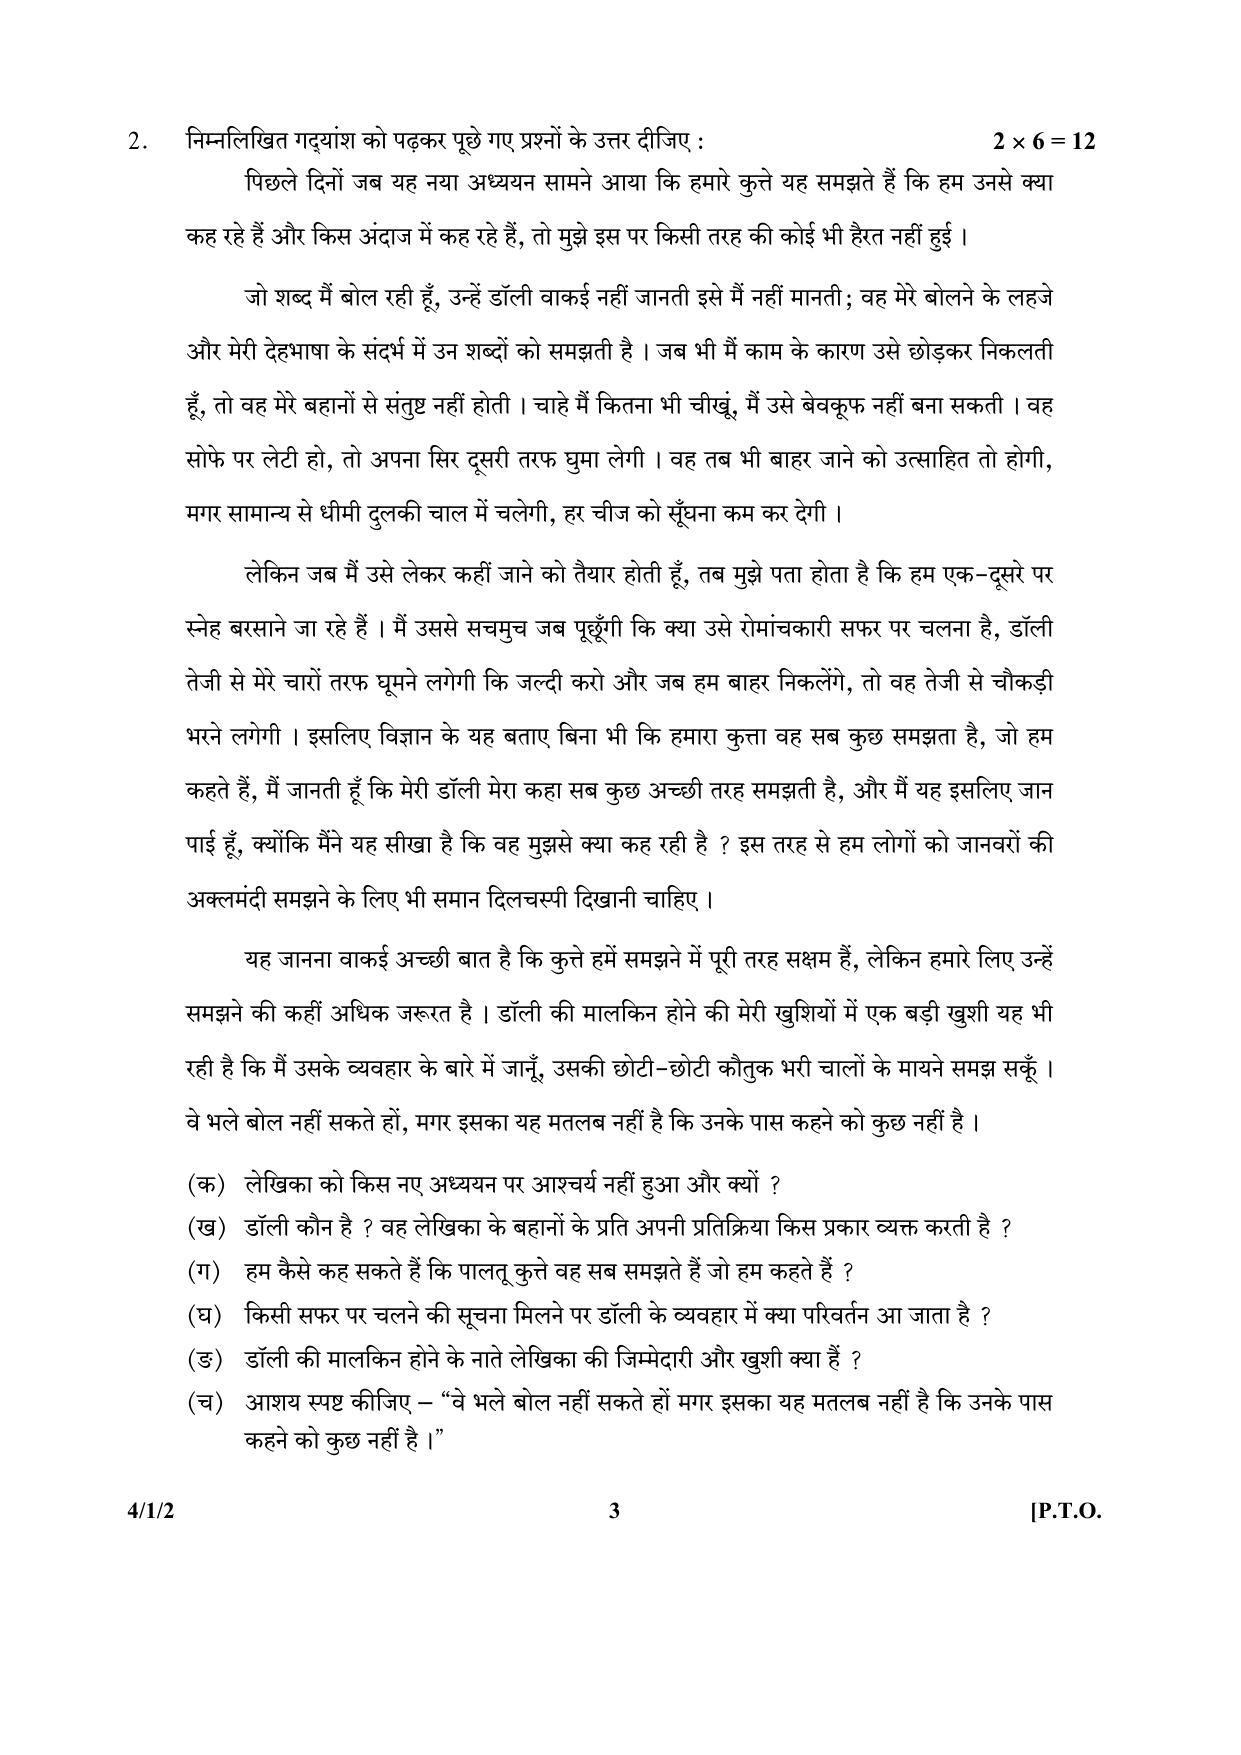 CBSE Class 10 4-1-2_Hindi 2017-comptt Question Paper - Page 3